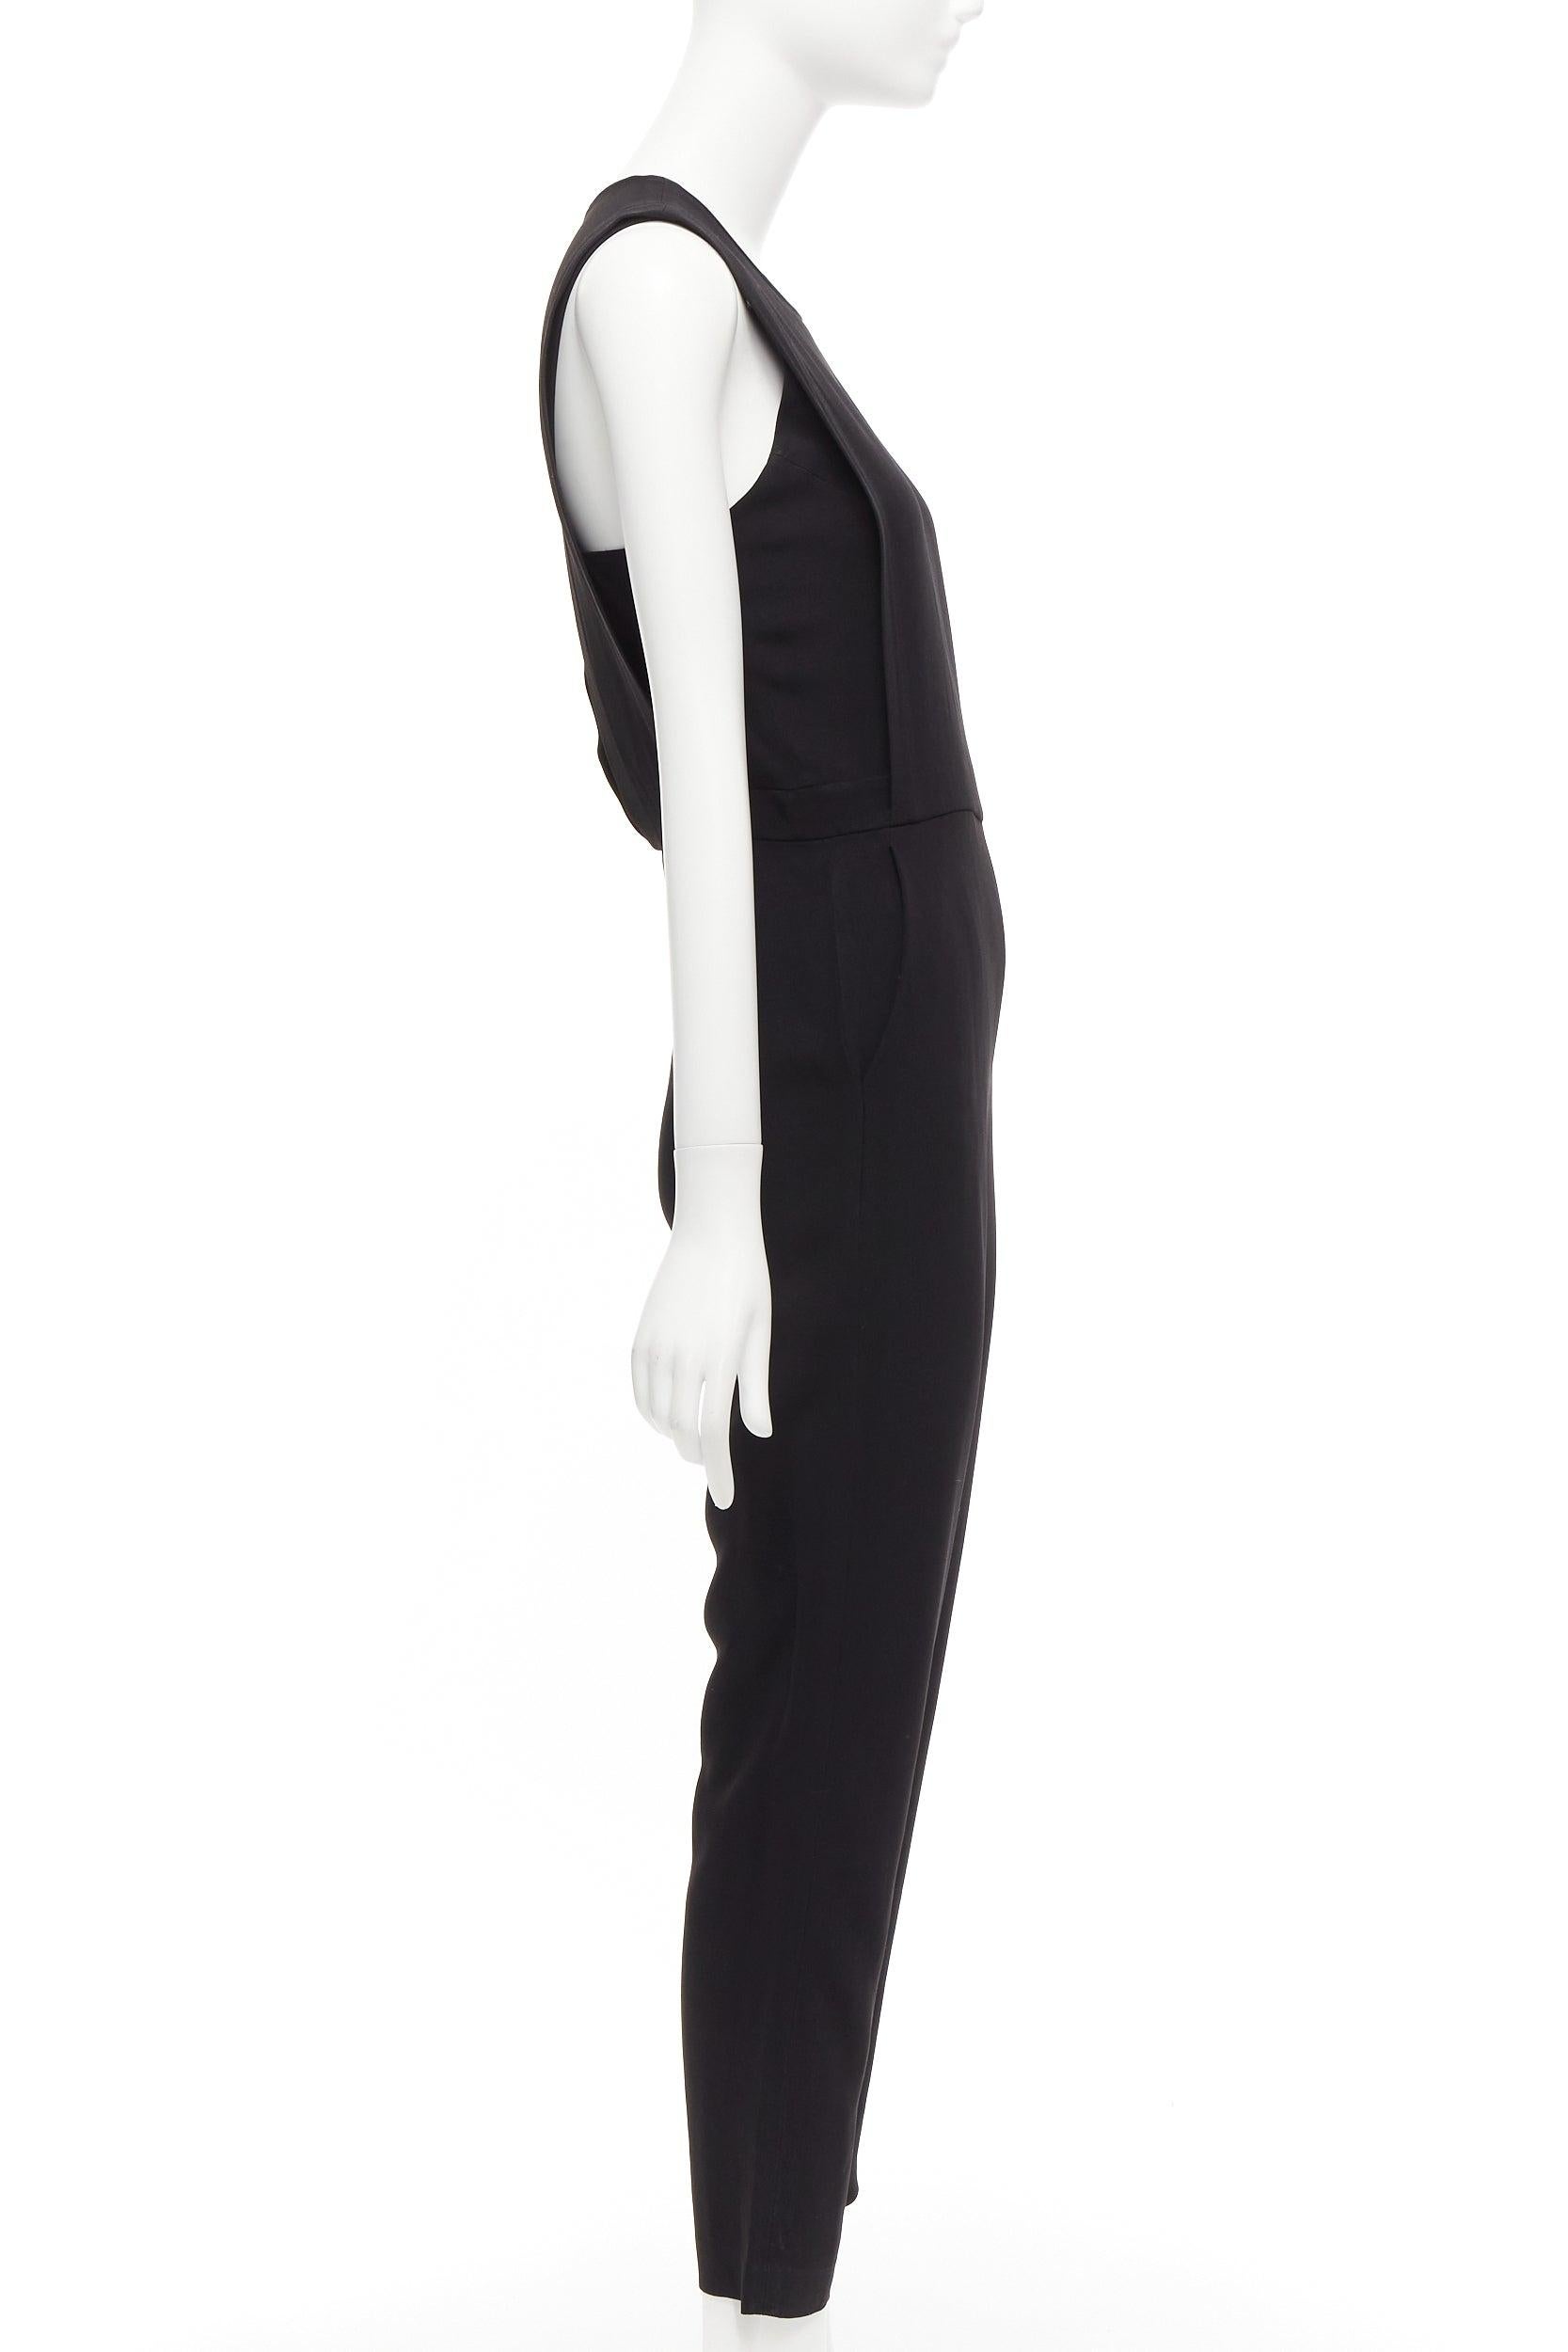 THEORY black layered top back zip cropped sleeveless jumpsuit US0 XS In Fair Condition For Sale In Hong Kong, NT